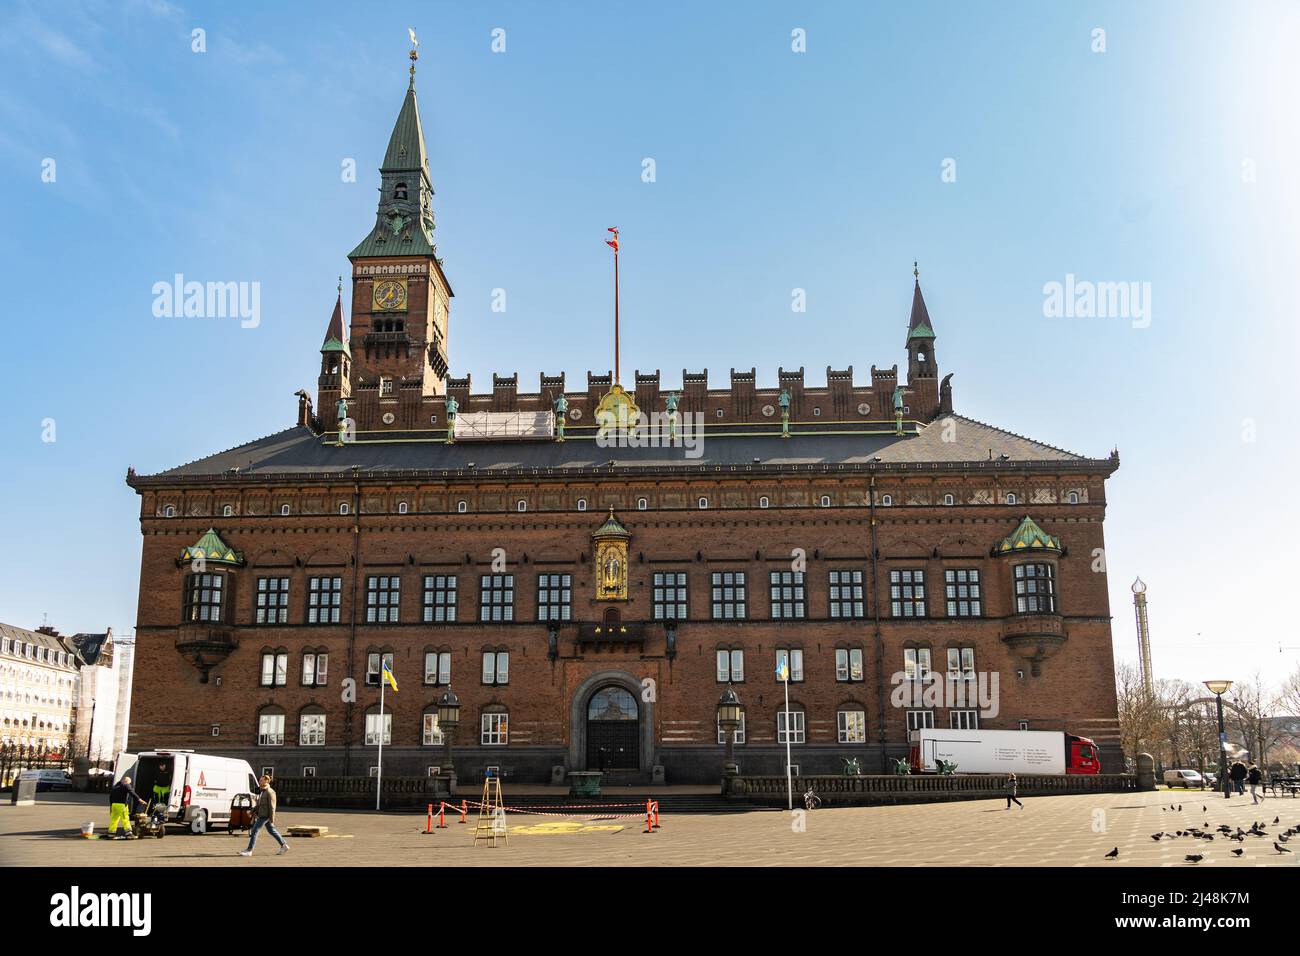 The Neo-Renaissance style Copenhagen City Hall, which stands on the central Rådhusplads, Town Hall Square. Copenhagen, Denmark, Europe Stock Photo